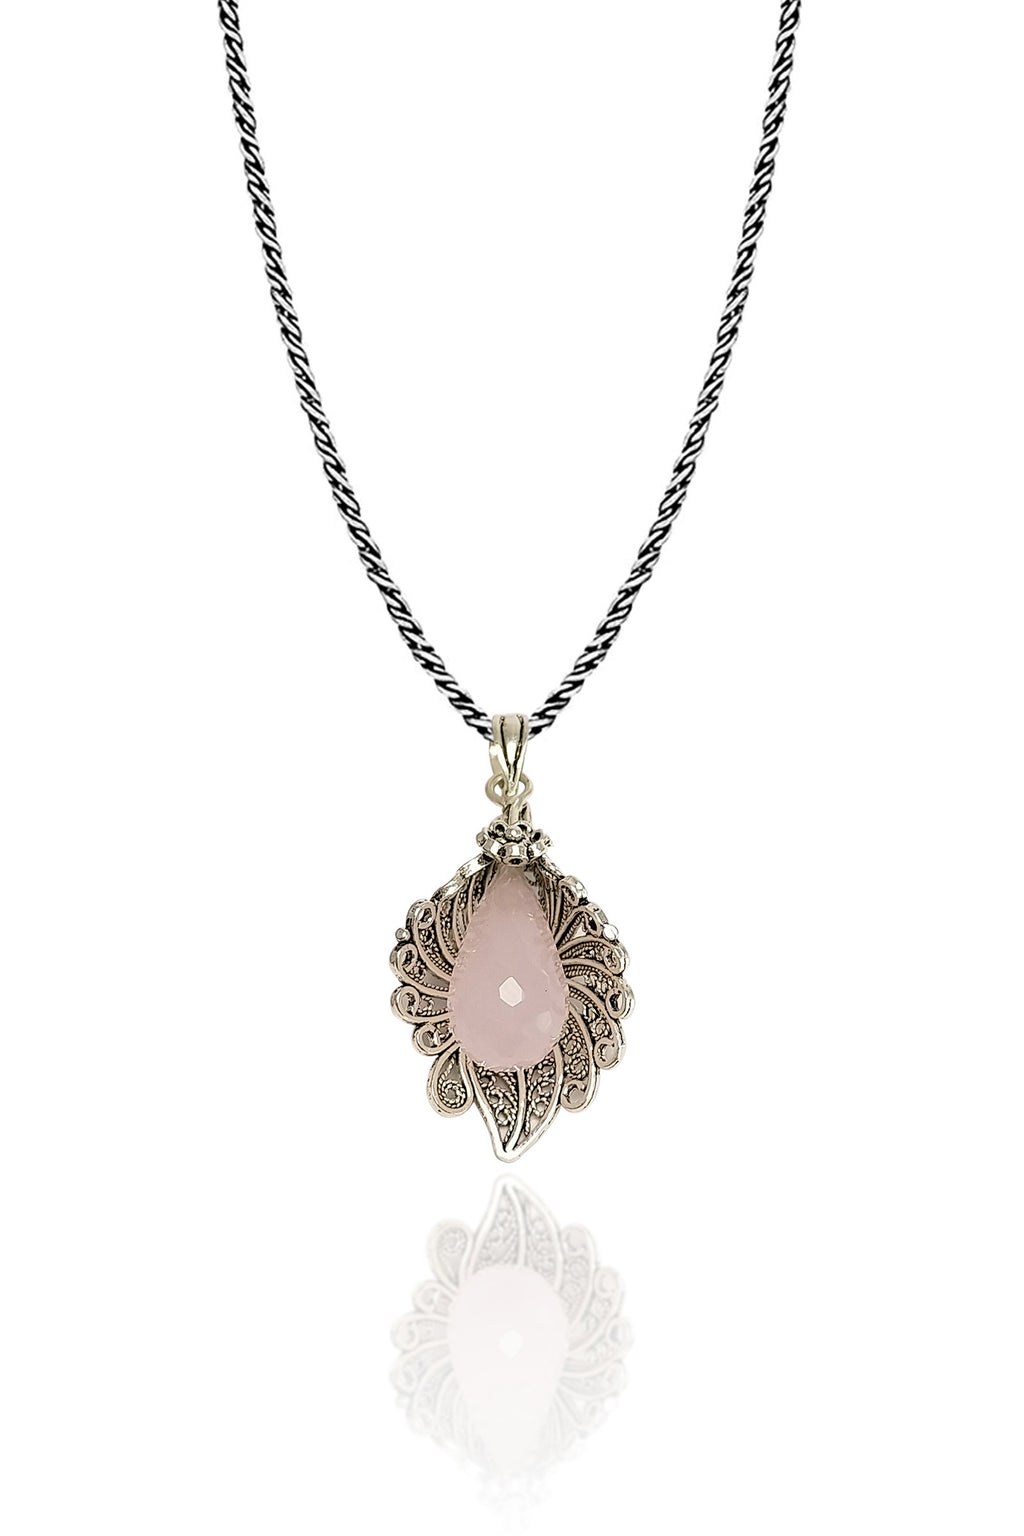 Lily Model Authentic Filigree Silver Necklace With Quartz (NG201018270)